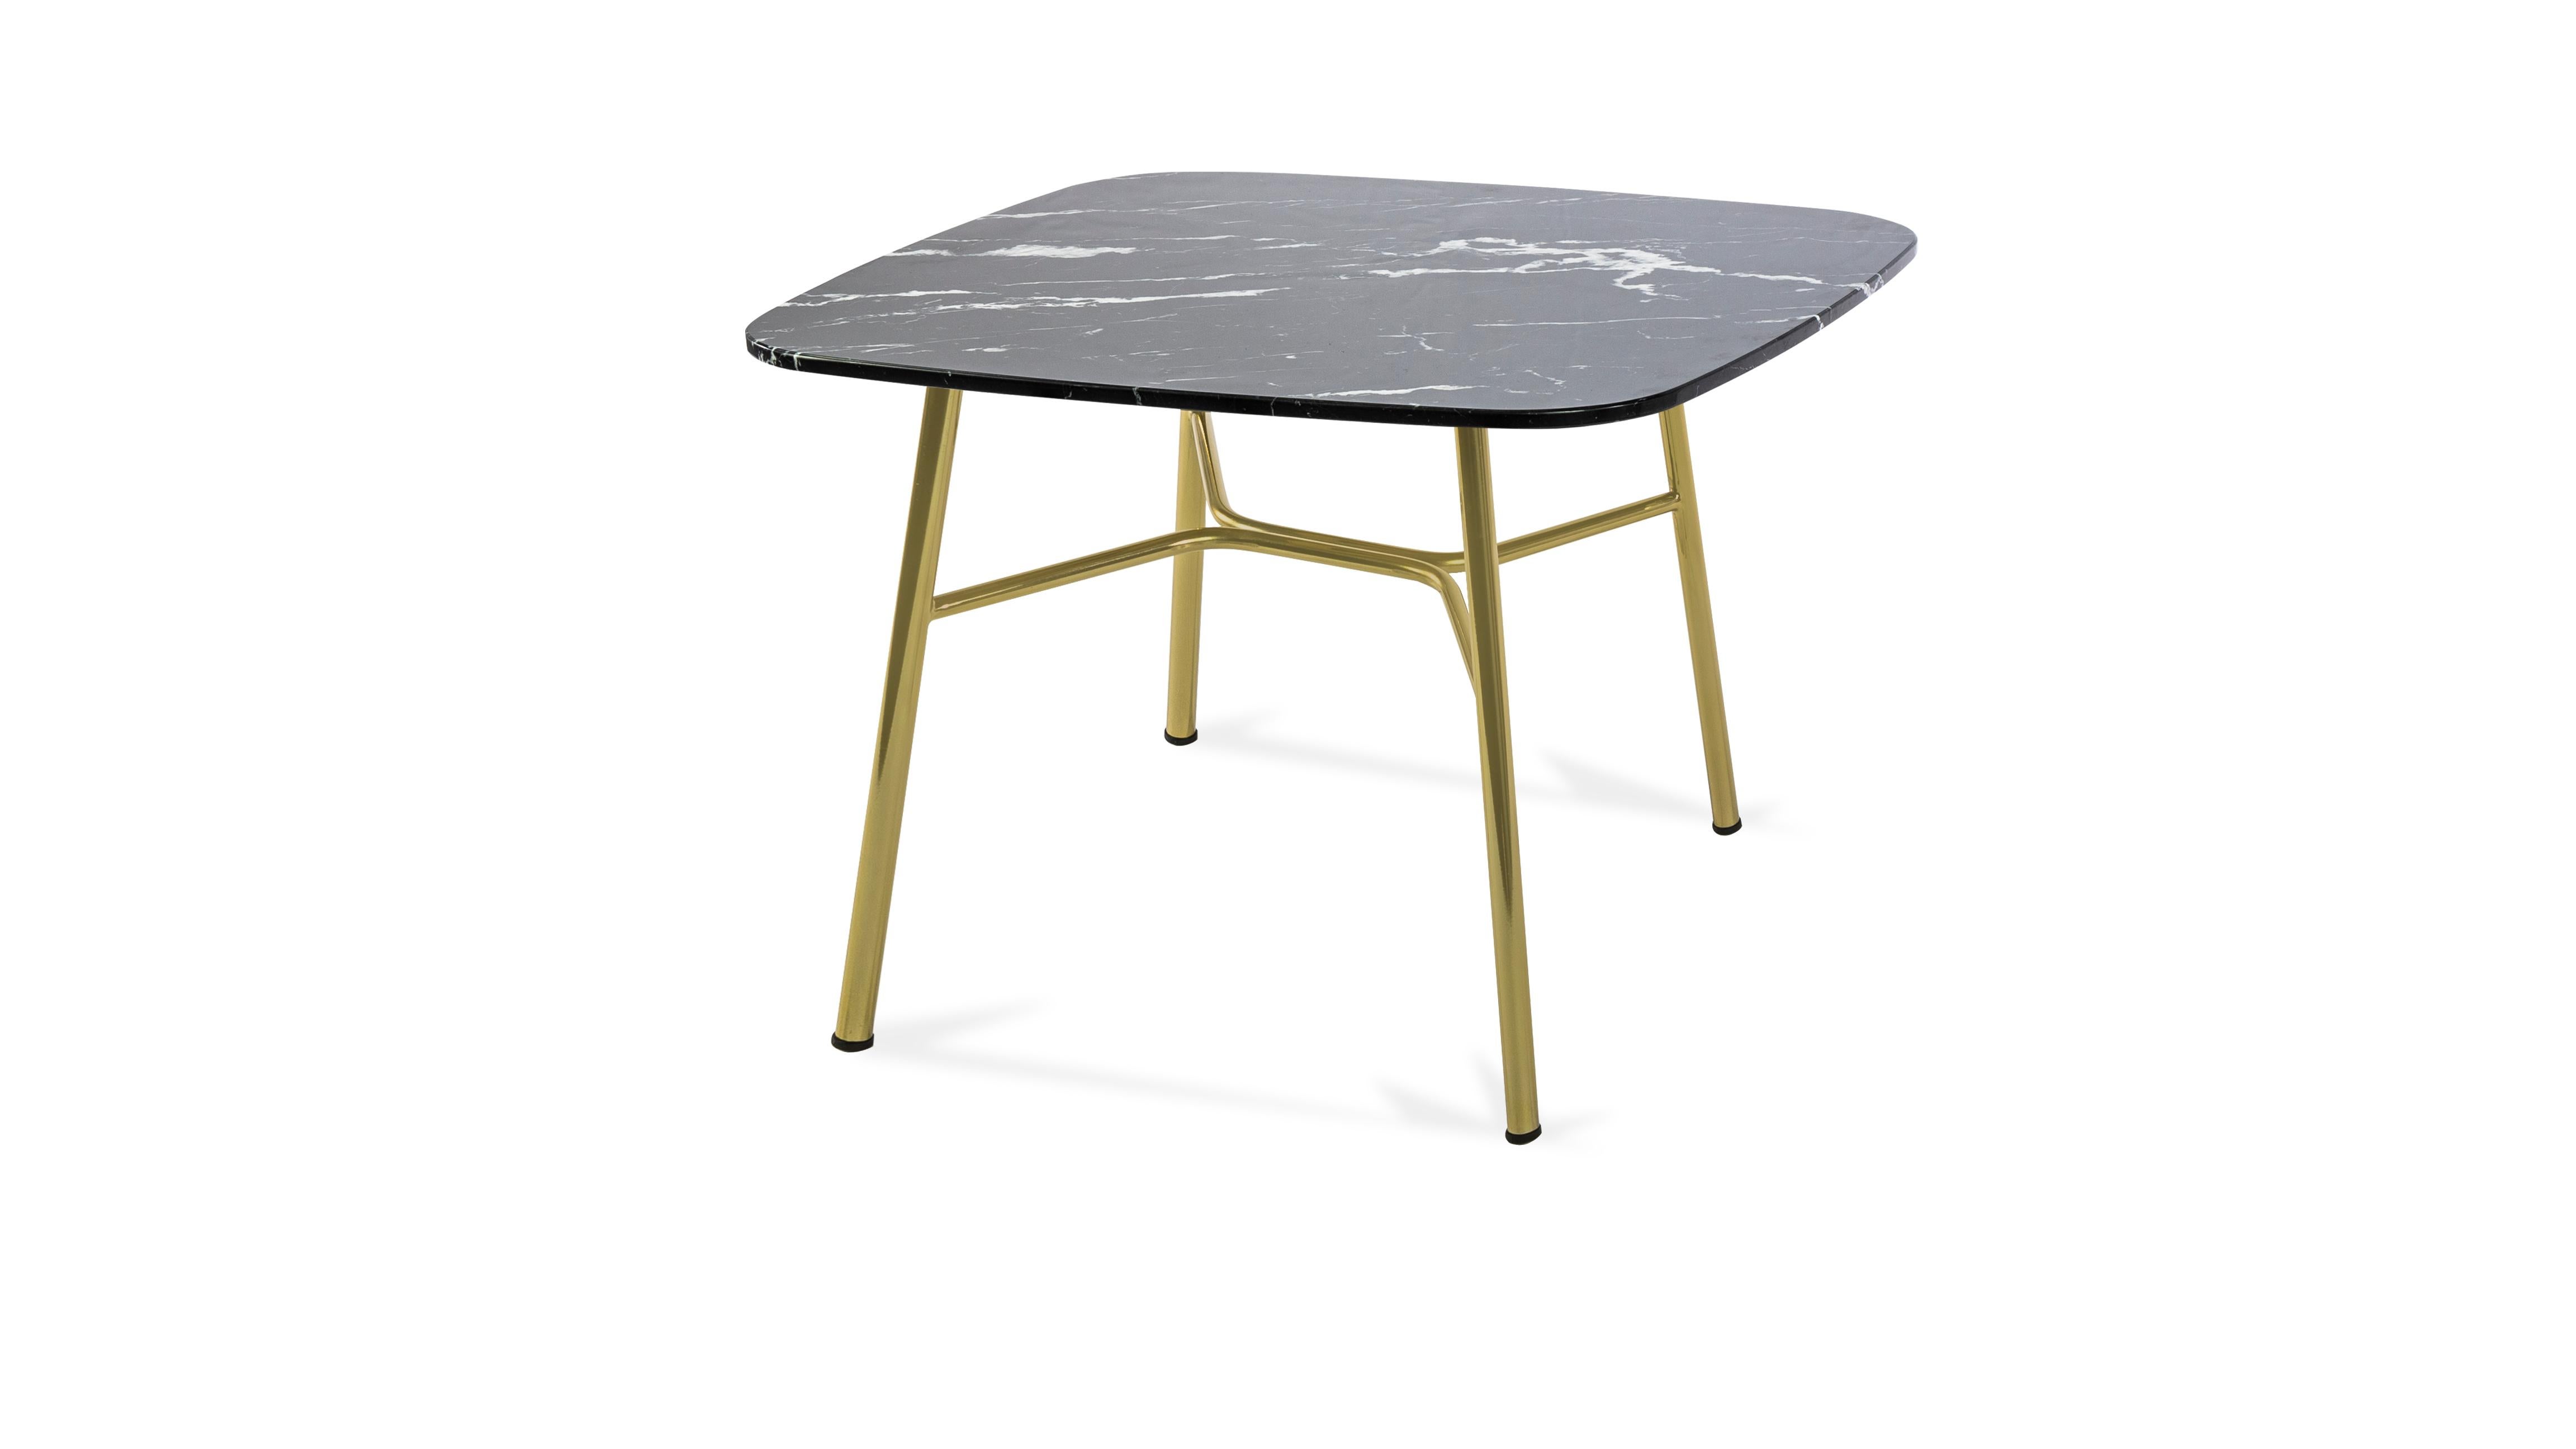 Little Table Yuki, Metal Frame, Round, Black Color, Design, Coffee Table In New Condition For Sale In MARANO VICENTINO, IT